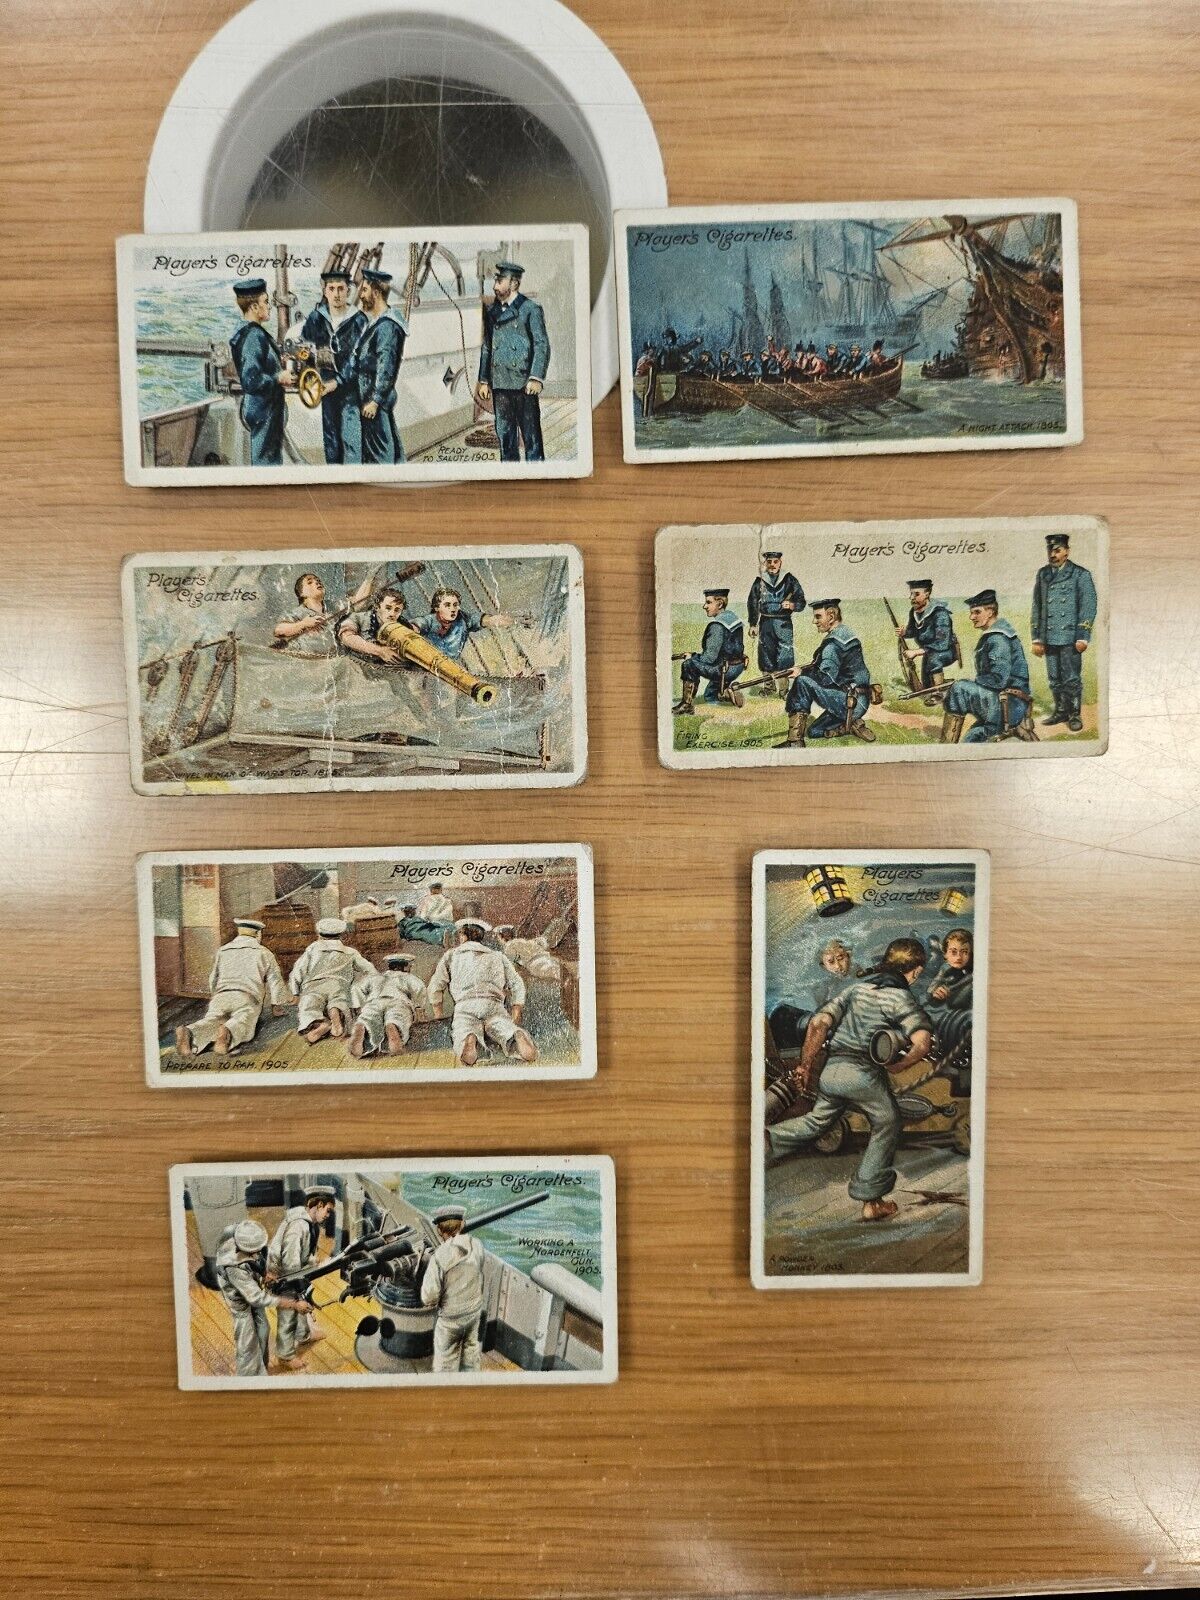 Players Cigarette Life On Board a Man of War in 1805 & 1905 Tobacco Mini Cards